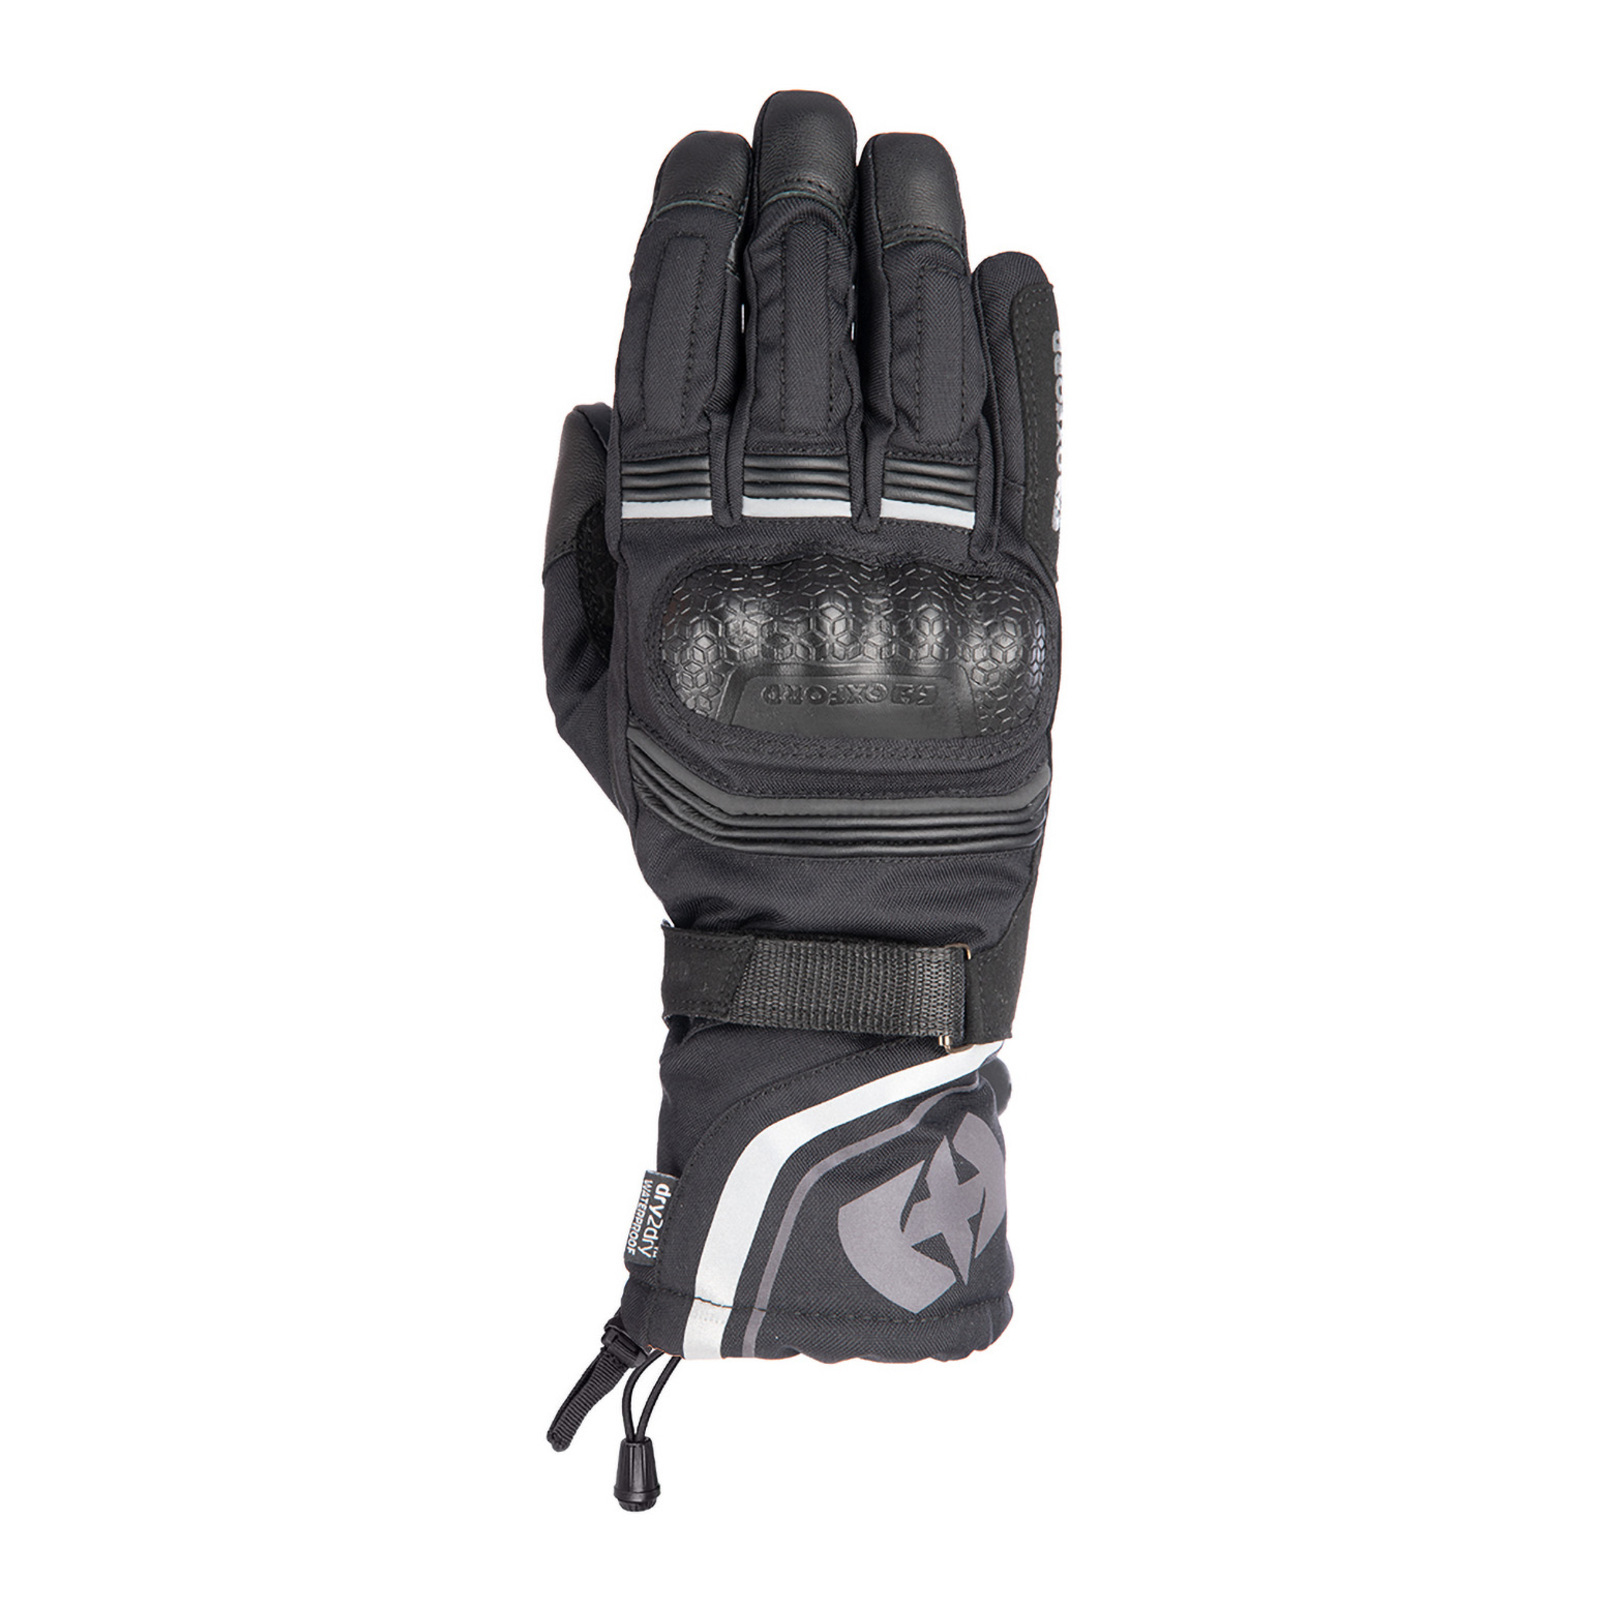 Oxford Montreal 4.0 Dry2Dry Glove - Stealth Black (3XL)